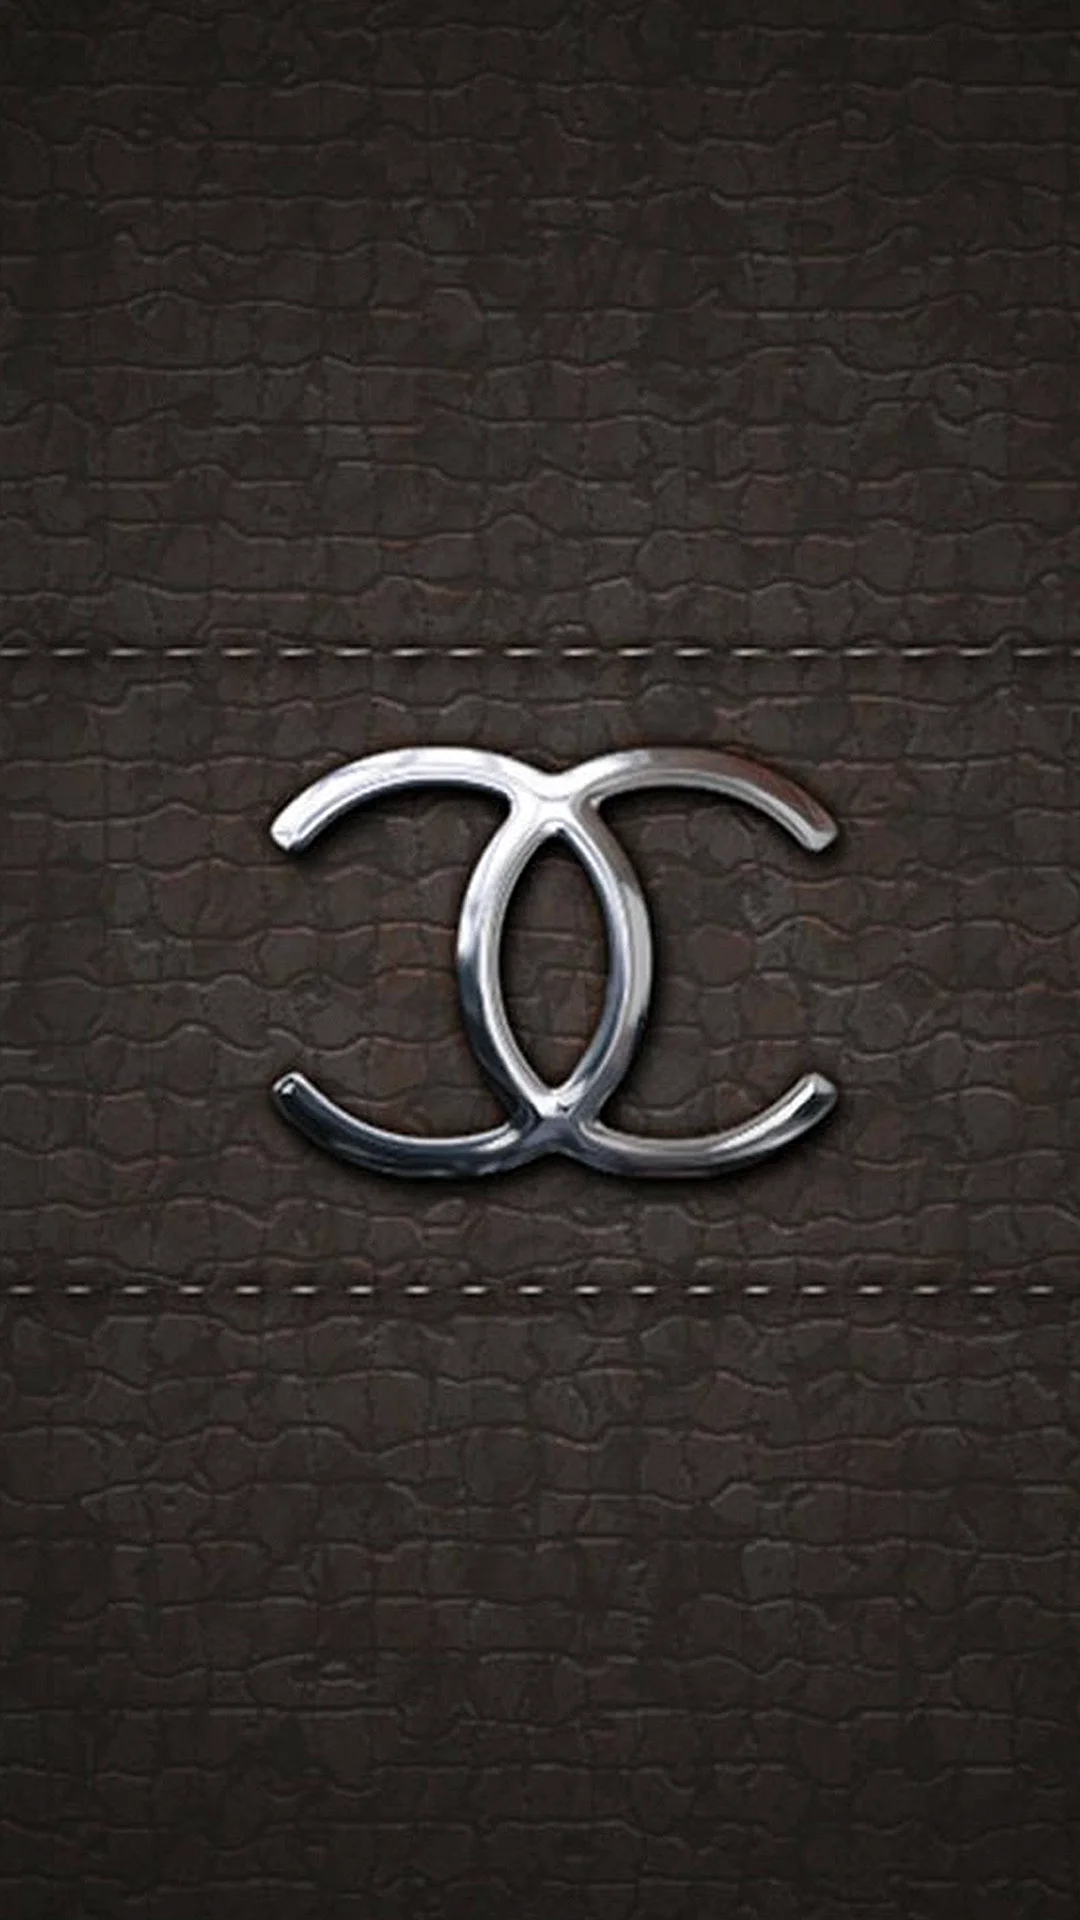 Chanel Phone Wallpaper For iPhone